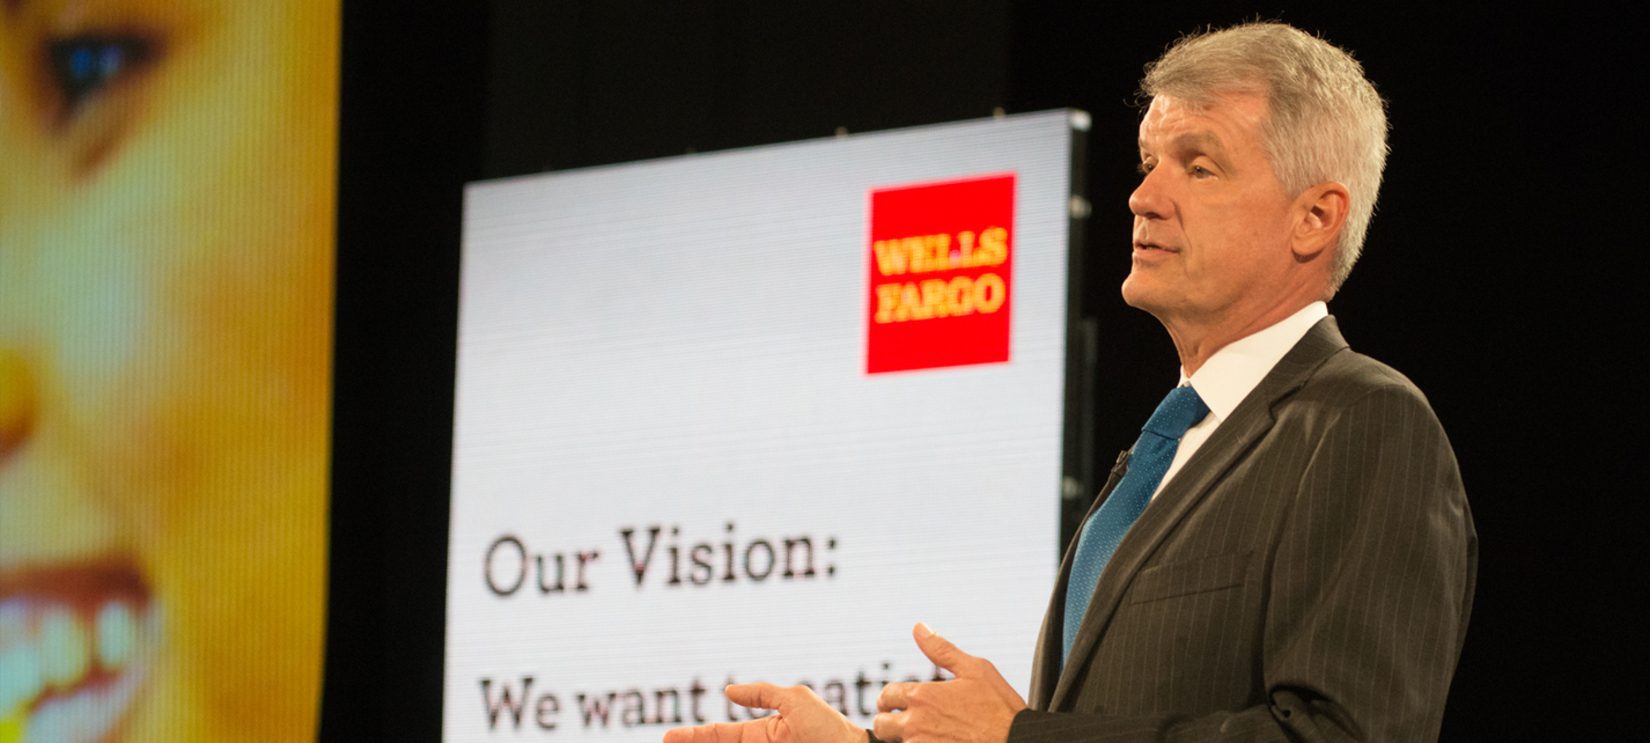 Tim Sloan Is Out. Do You Want to Run Wells Fargo?